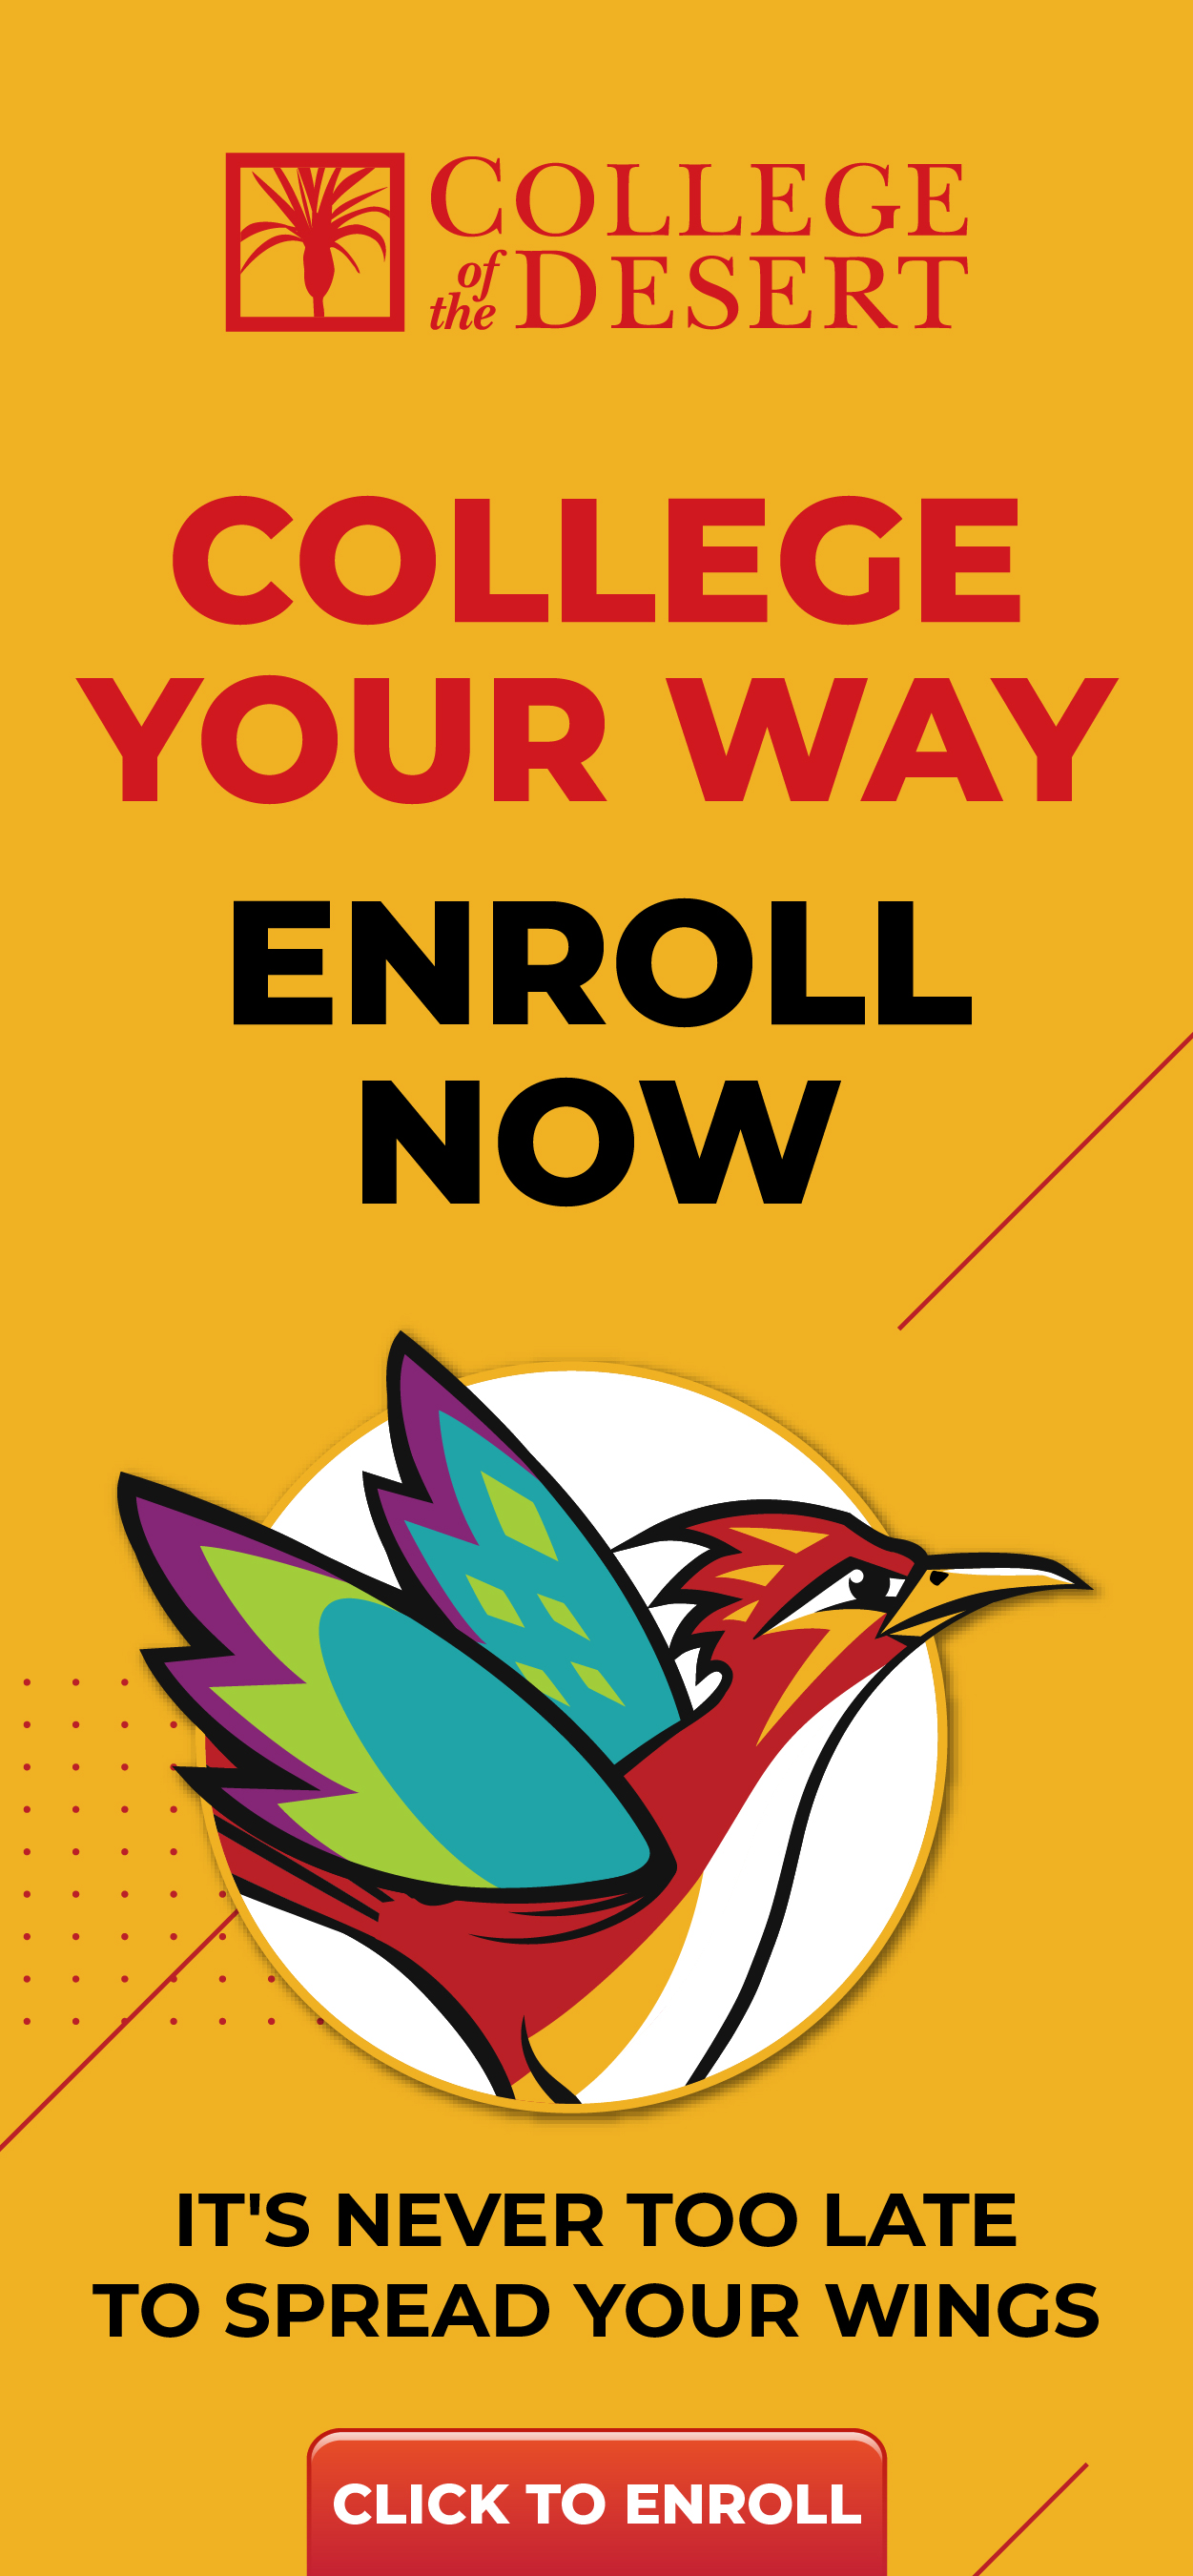 College your way, enroll now! Its never too late to spread your wings.